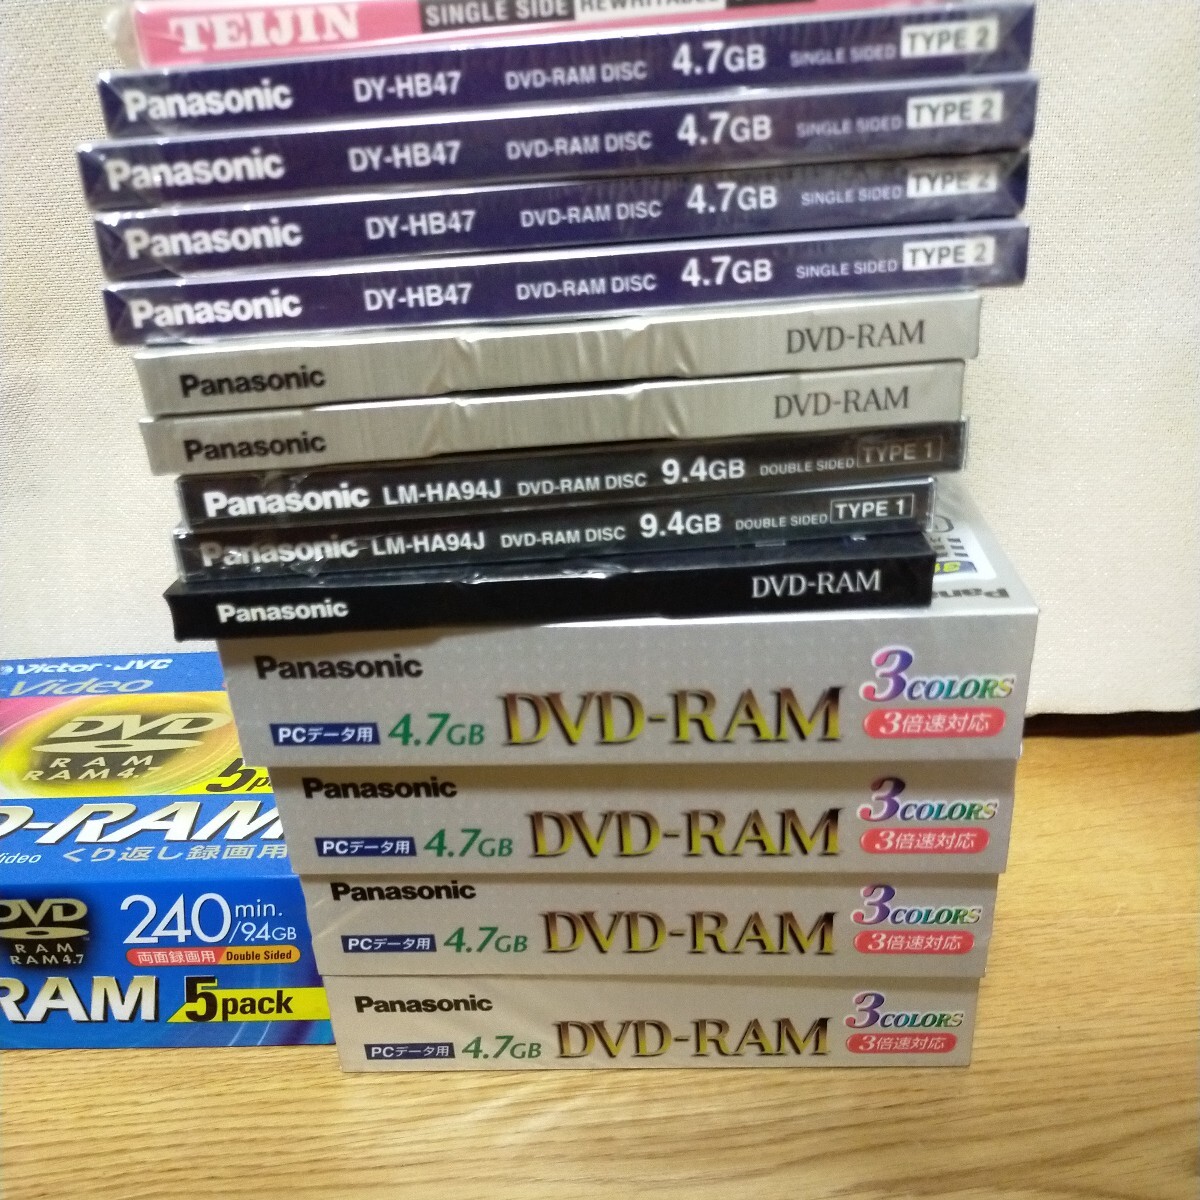 DVD-RAM large amount set summarize Panasonic maxell TEIJIN TDK Victor Leader media Techno FINE 120 size including in a package un- possible Panasonic mak cell 